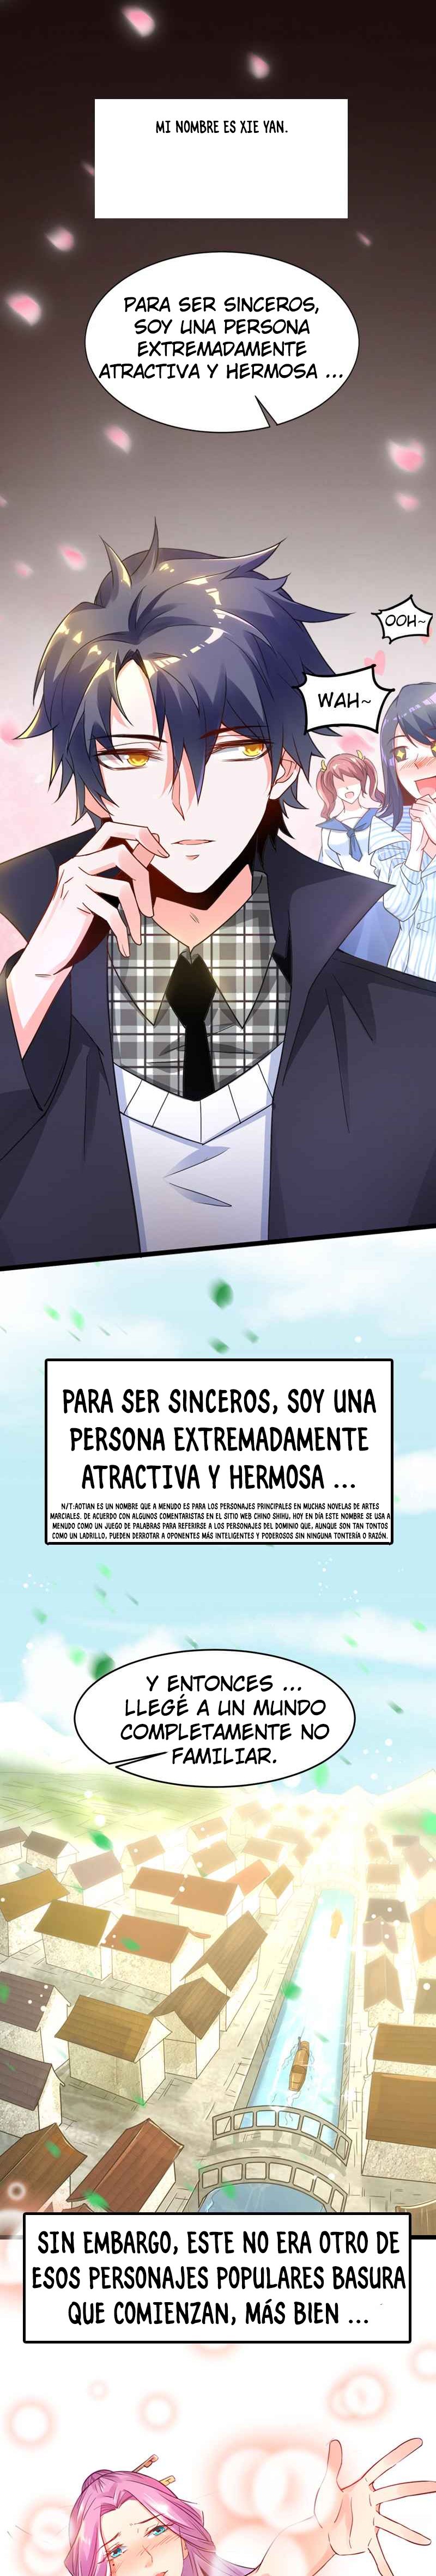 Manga Soy un dios maligno Chapter 0 image number 5